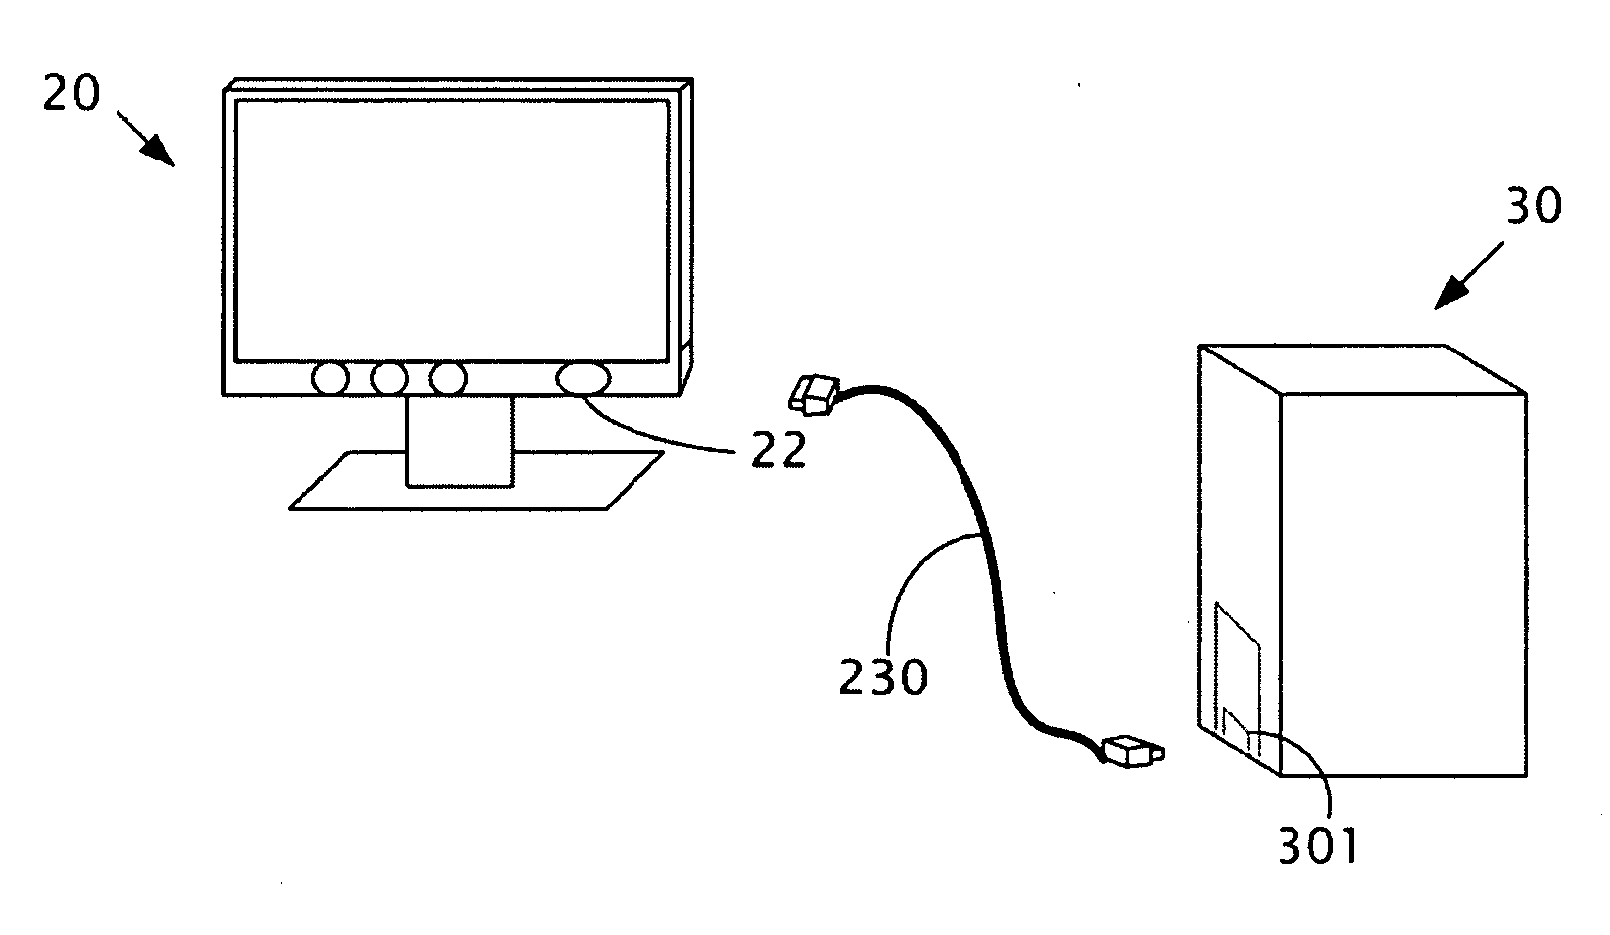 Display, computer system and method for controlling a computer to fall asleep